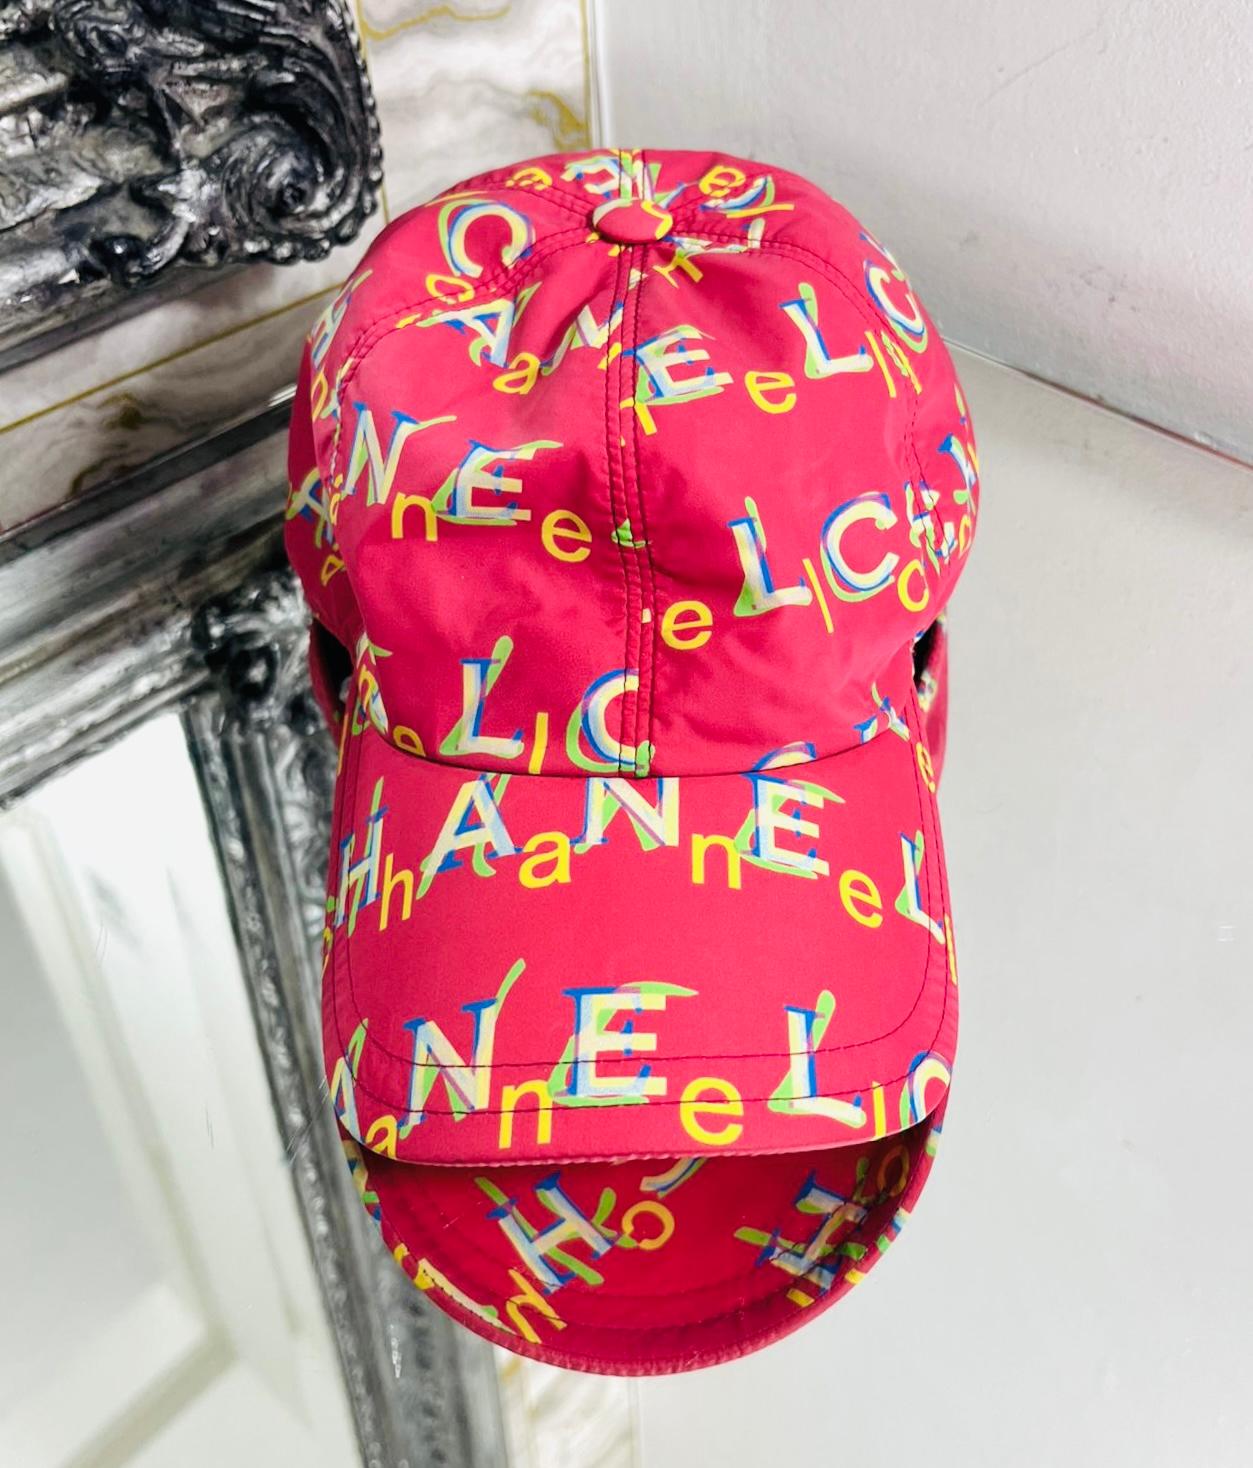 Chanel Logo Nylon Cap

Fuchsia/red cap designed with multicoloured overlapping 'Chanel' logo letters.

Featuring curved visor and open back with adjustable fitting, embellished with two silver 'CC' logos.

Size – One Size

Condition – Very